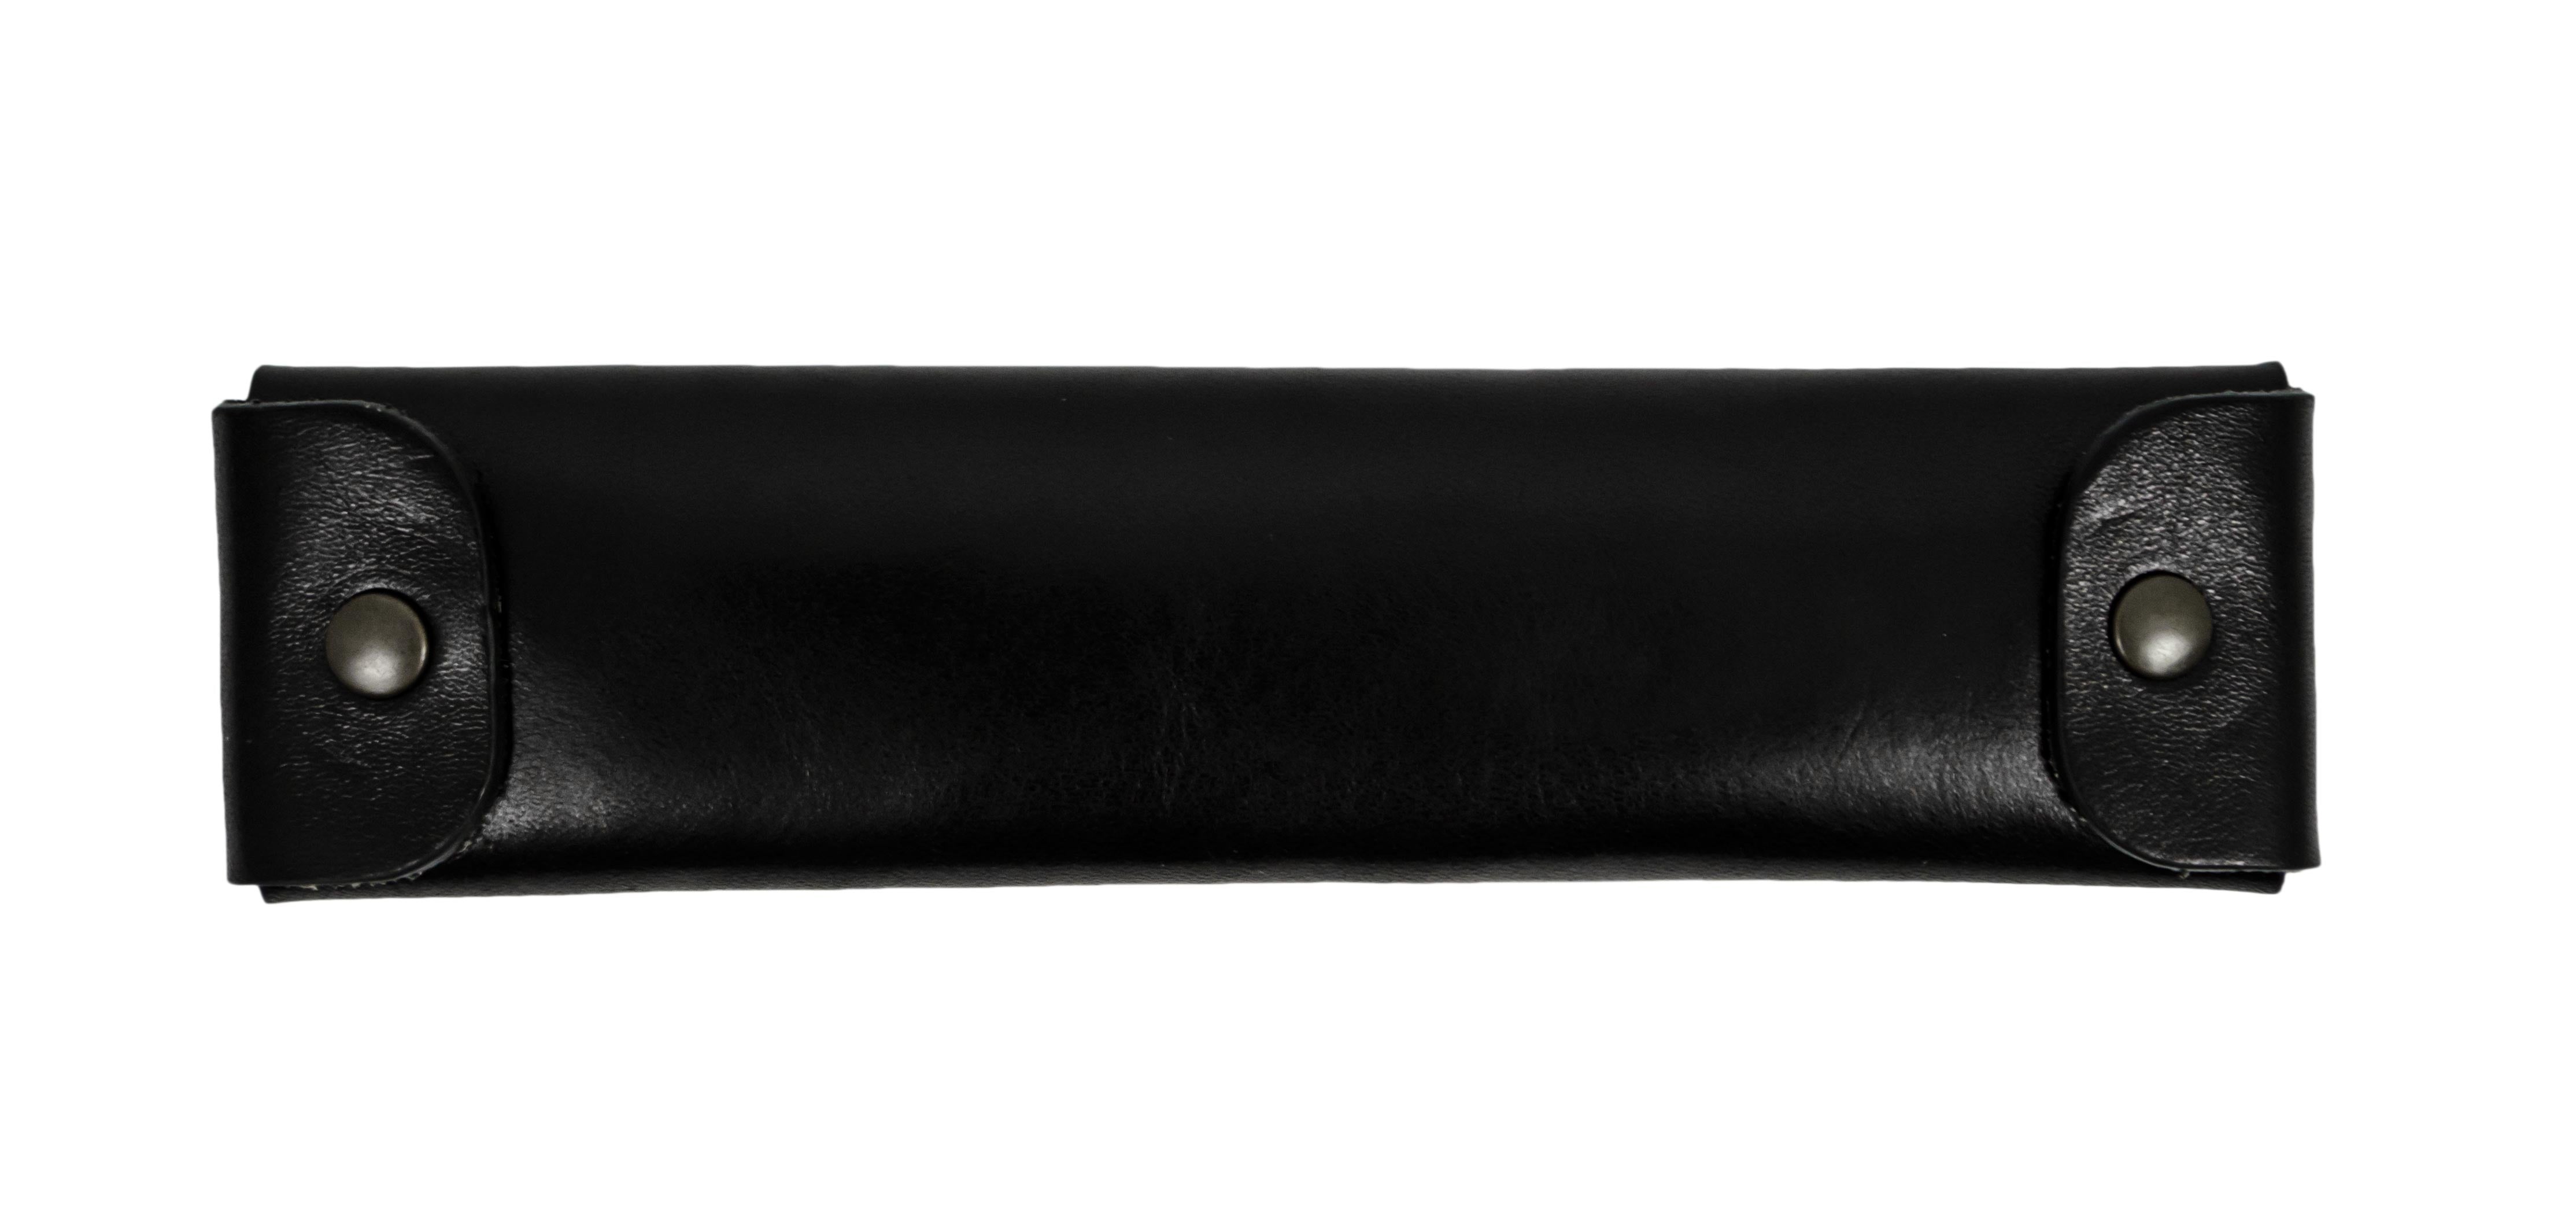 Leather Pen Case Holder - Appointment in Samarra